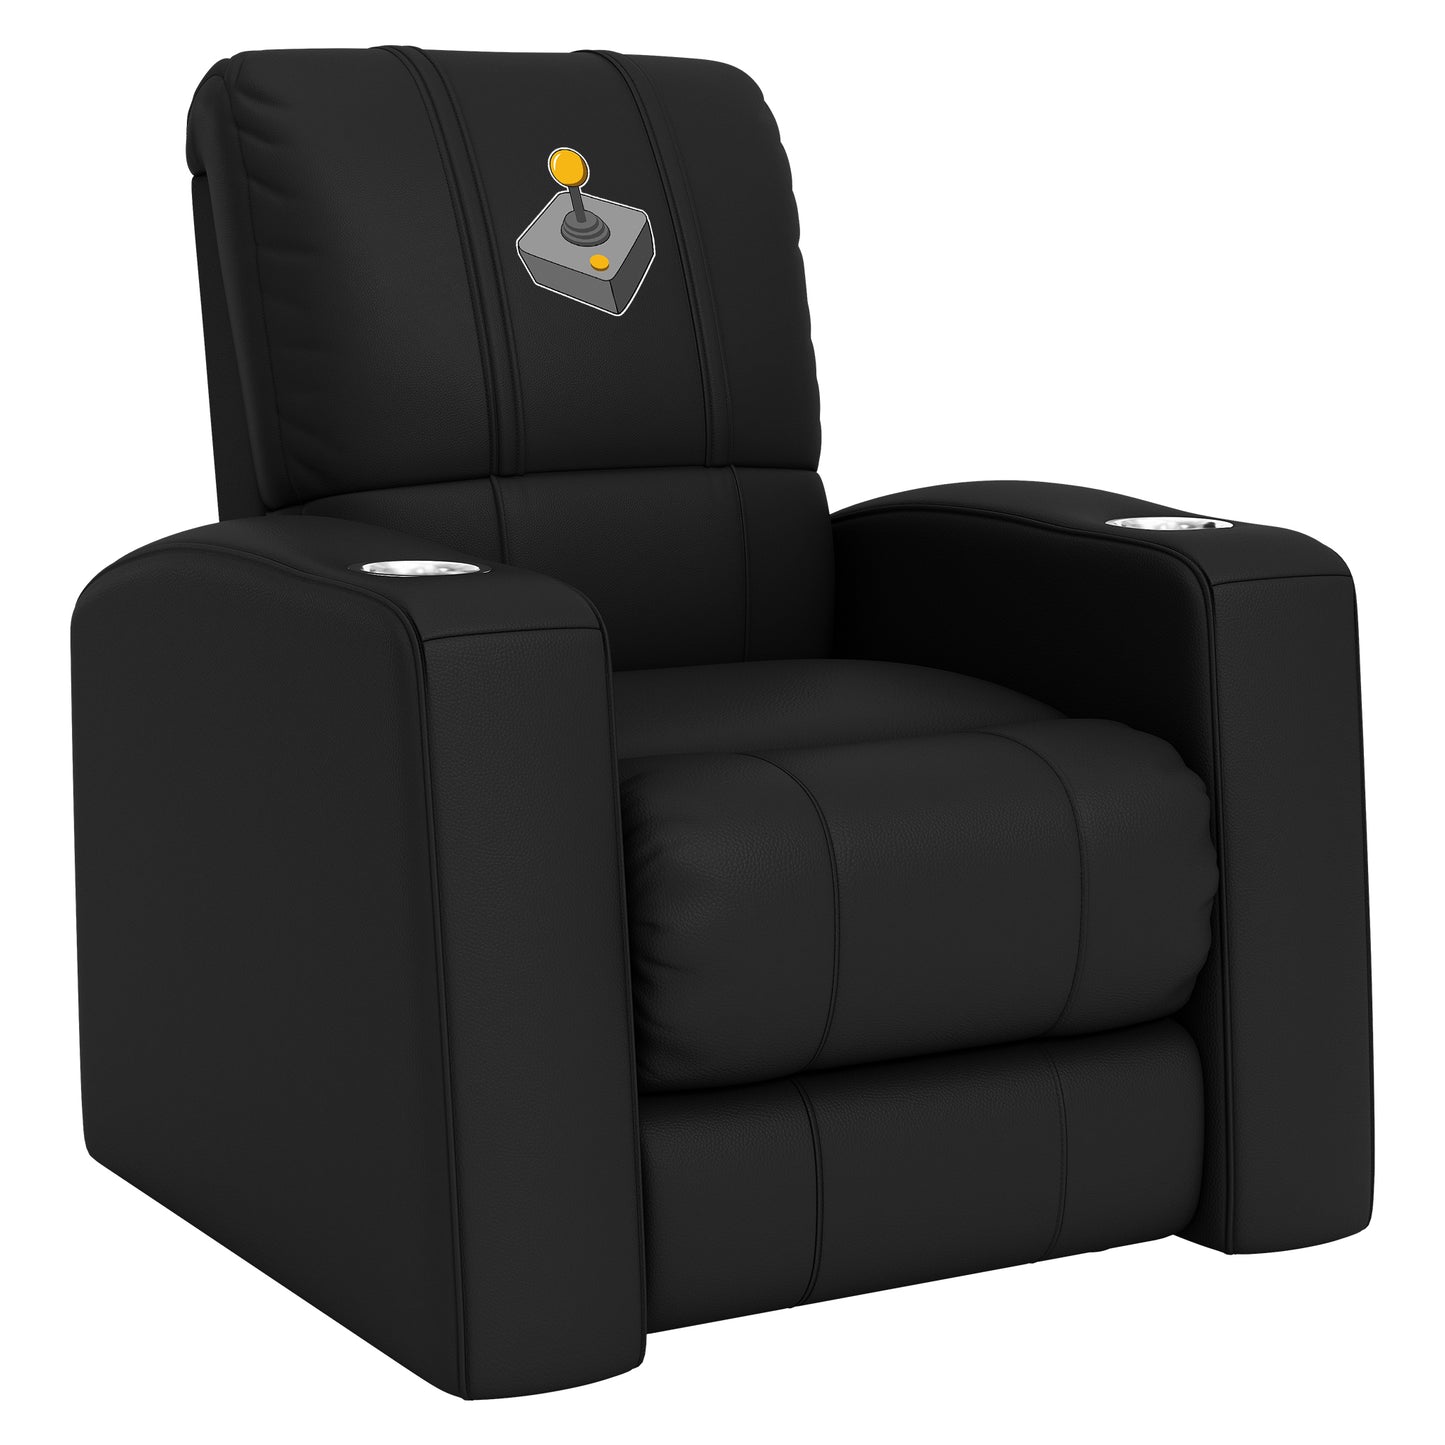 Home Theater Recliner with Joystick Gaming Logo